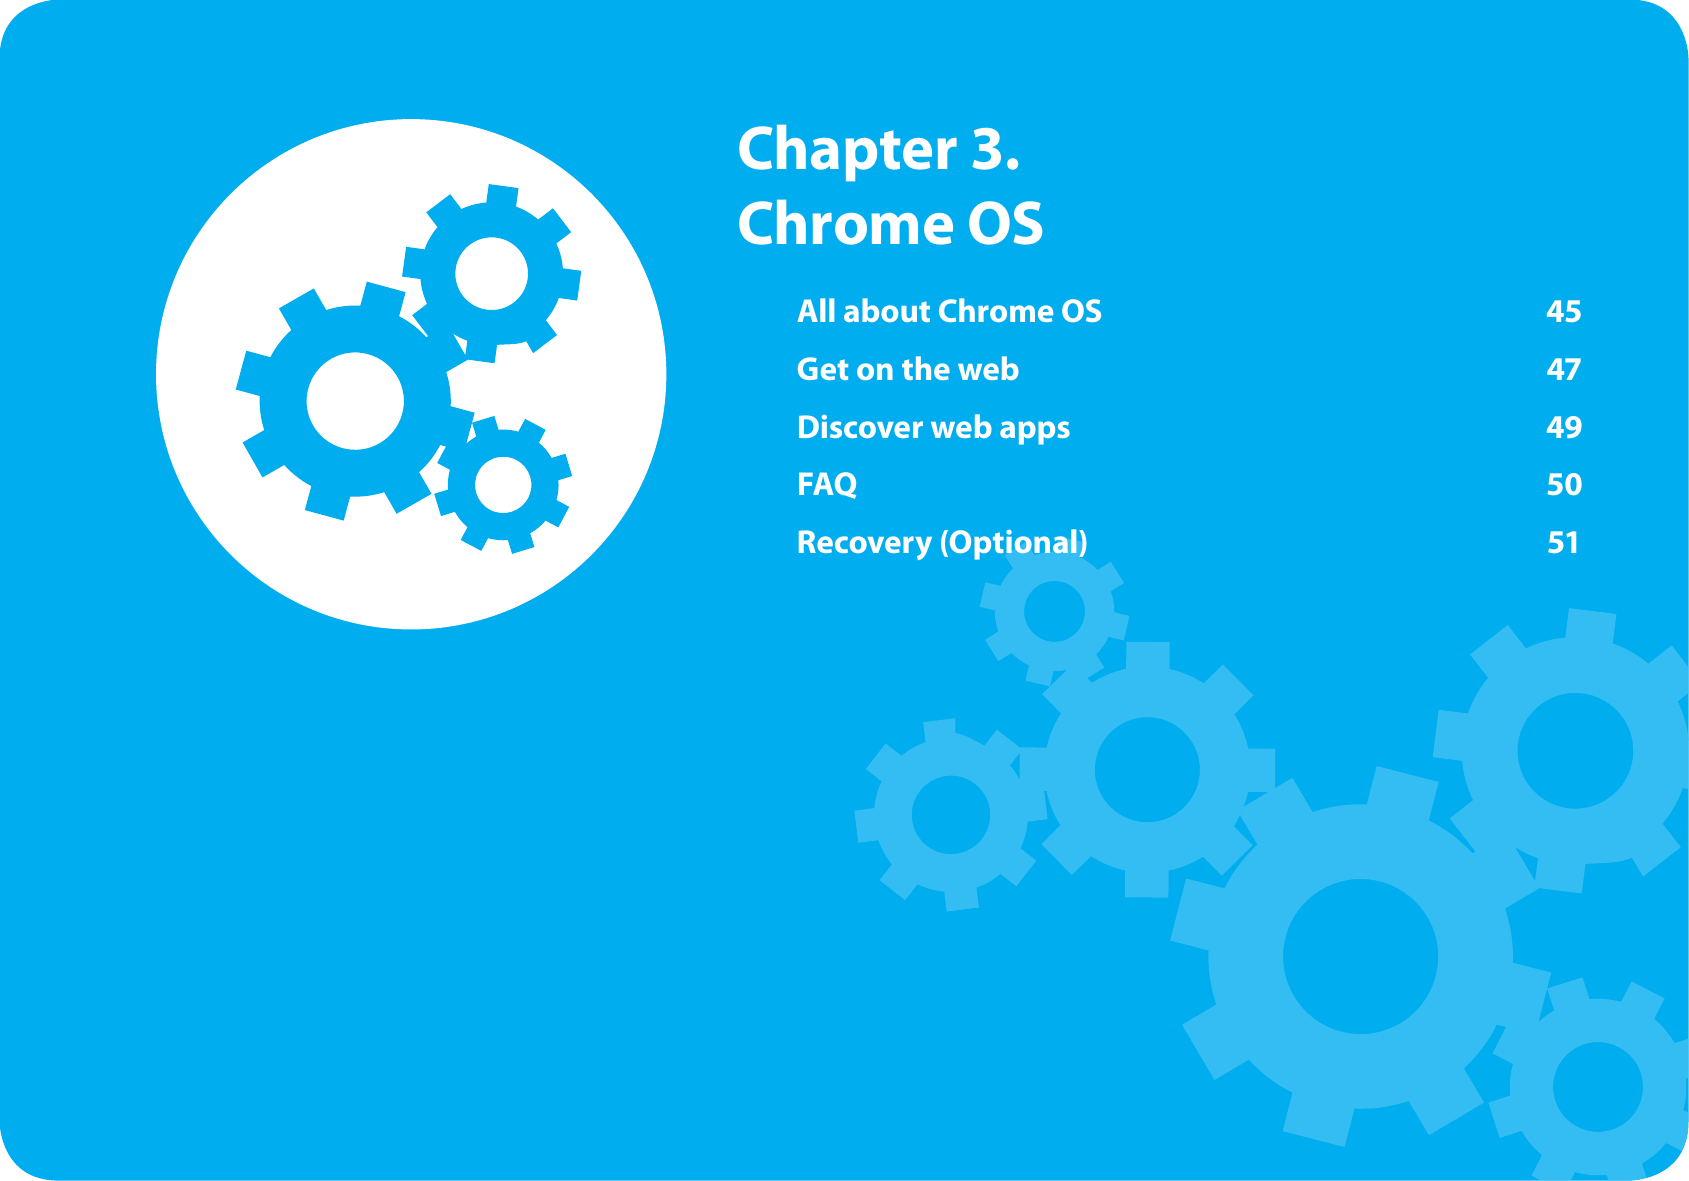 All about Chrome OS  45Get on the web  47Discover web apps  49FAQ  50Recovery (Optional)  51  Chapter 3. Chrome OS